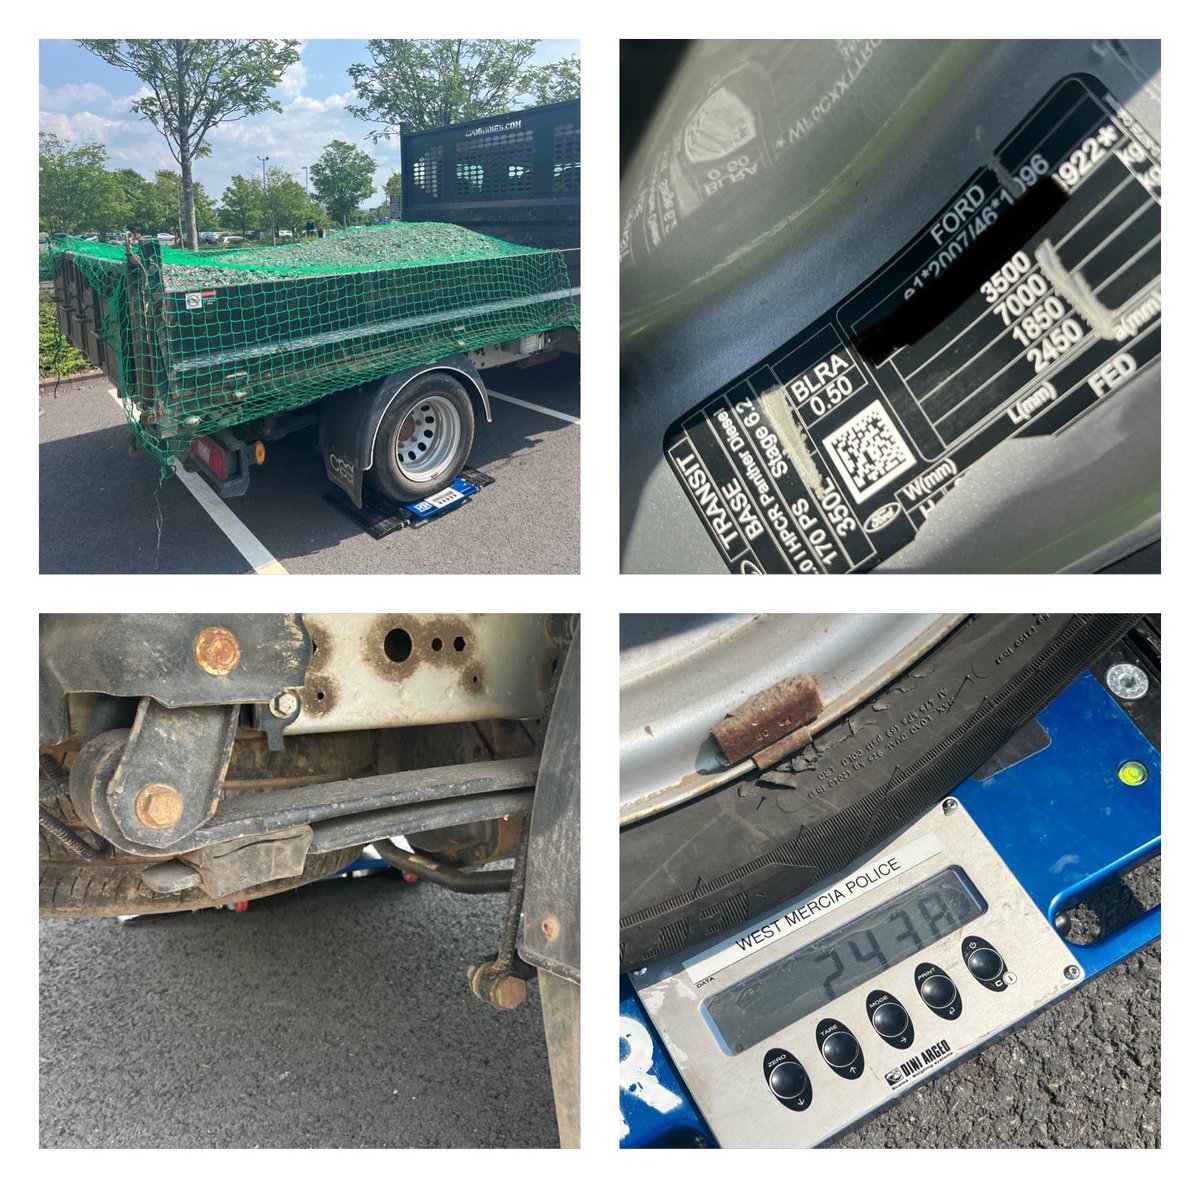 Team A, an excessively overweight vehicle. Gross weight over by 93% & over on axle 2 by 100%. Vehicle prohibited, ticket issued . @WMerciaRoads @WestMerciaPCC @CCPippaMills OR95